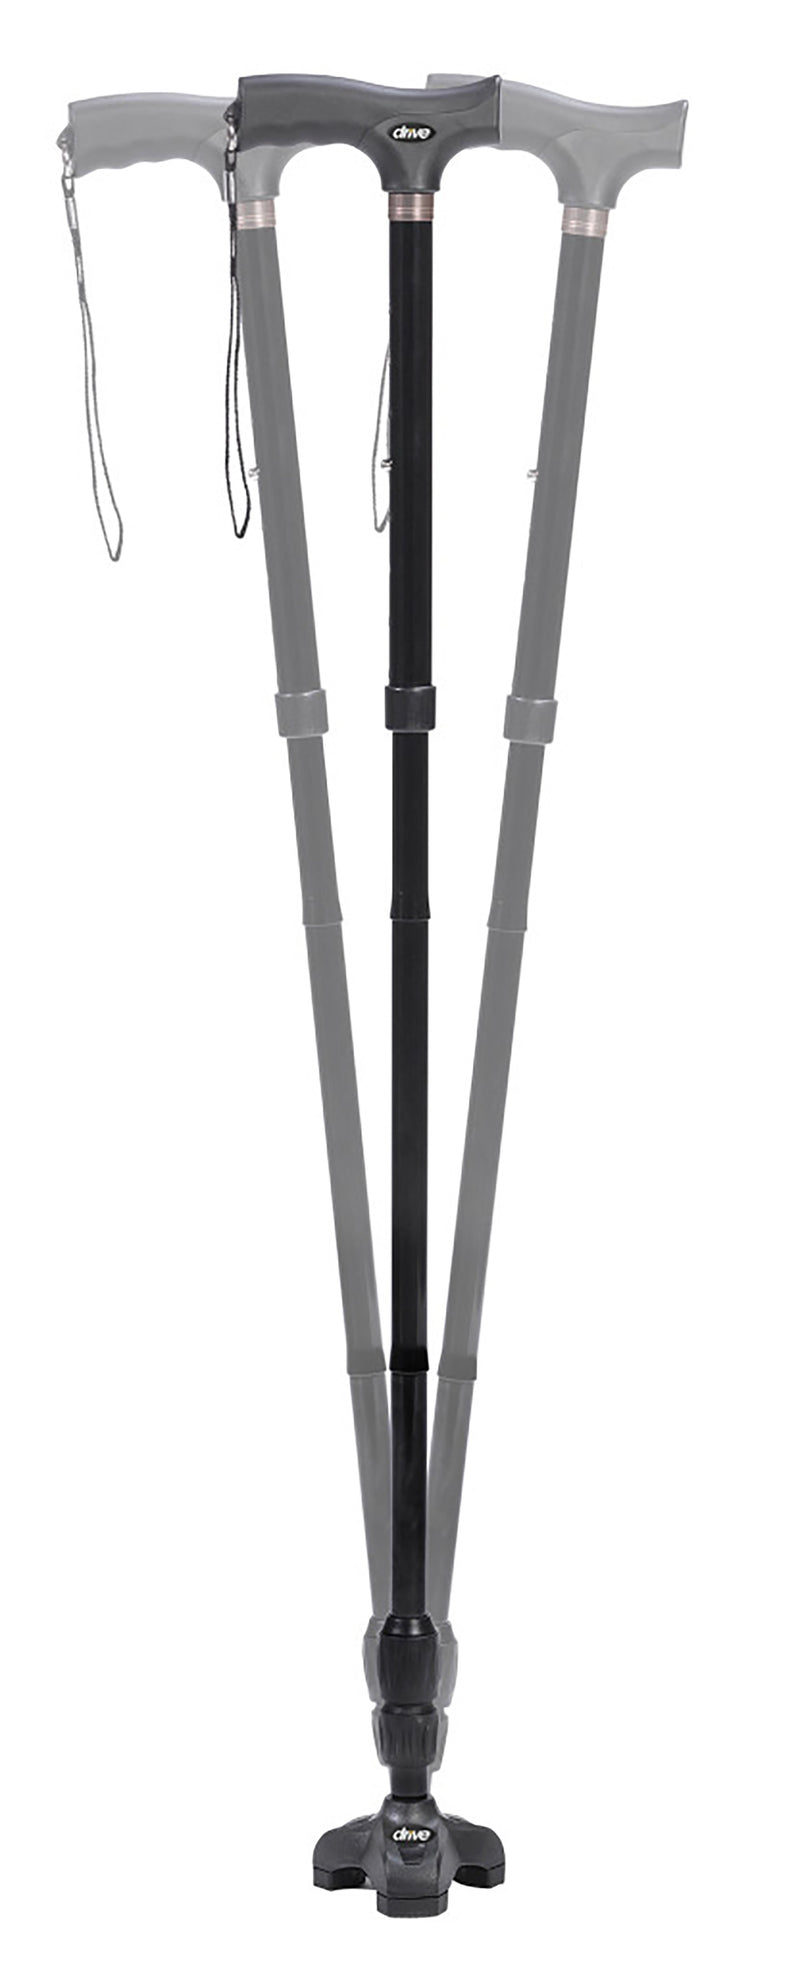 Flex-N-Go Aluminum Folding Cane, 32½ – 39½ Inch Height, Sold As 12/Case Drive Rtl10305